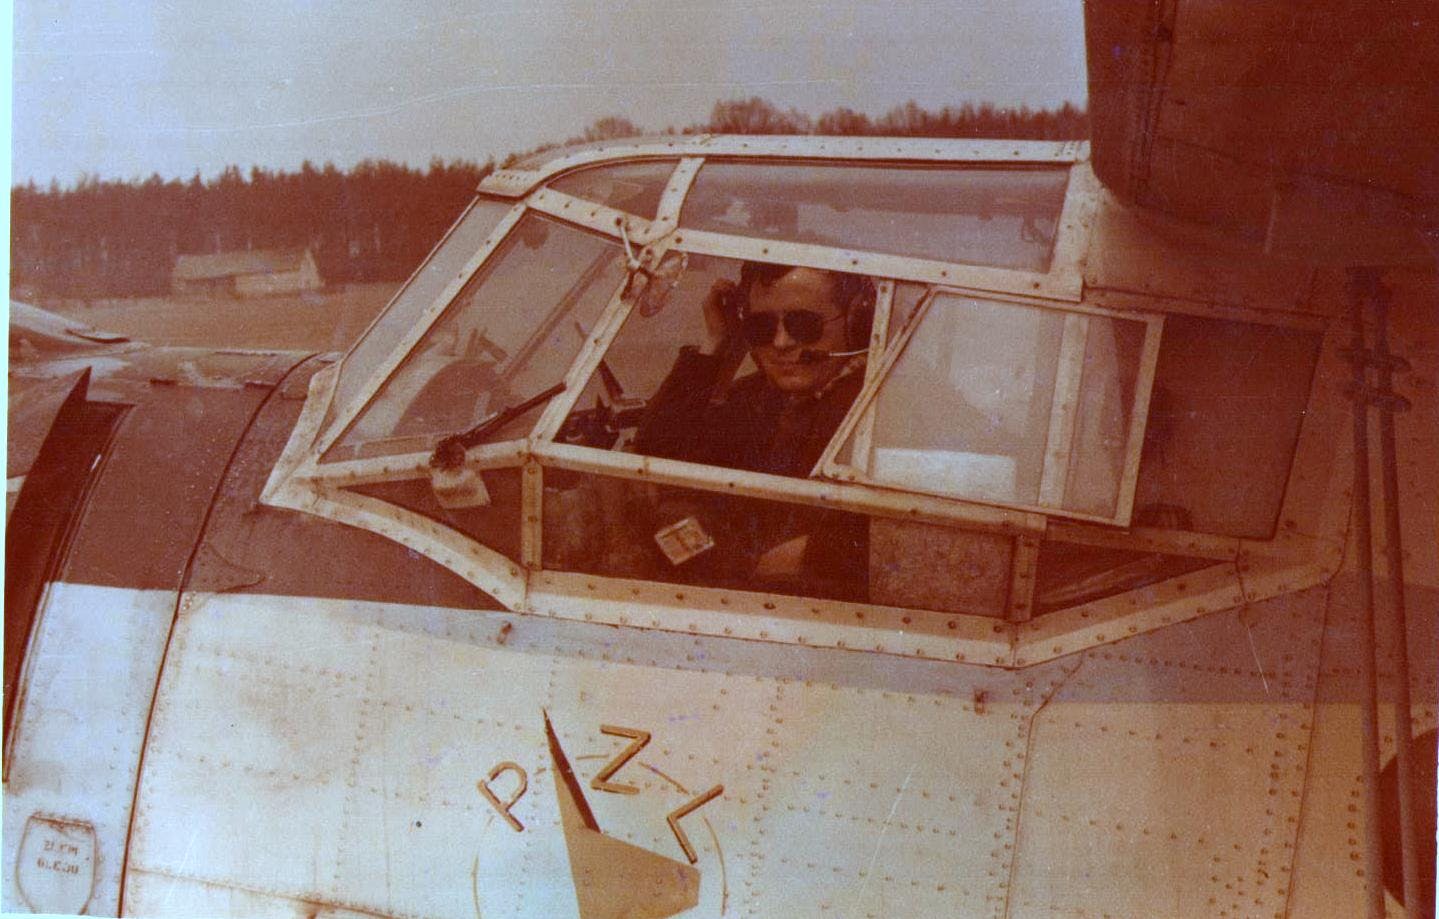 Greater Poland, 1980s. Zbigniew Kowalski before take-off for agro-aviation treatments.